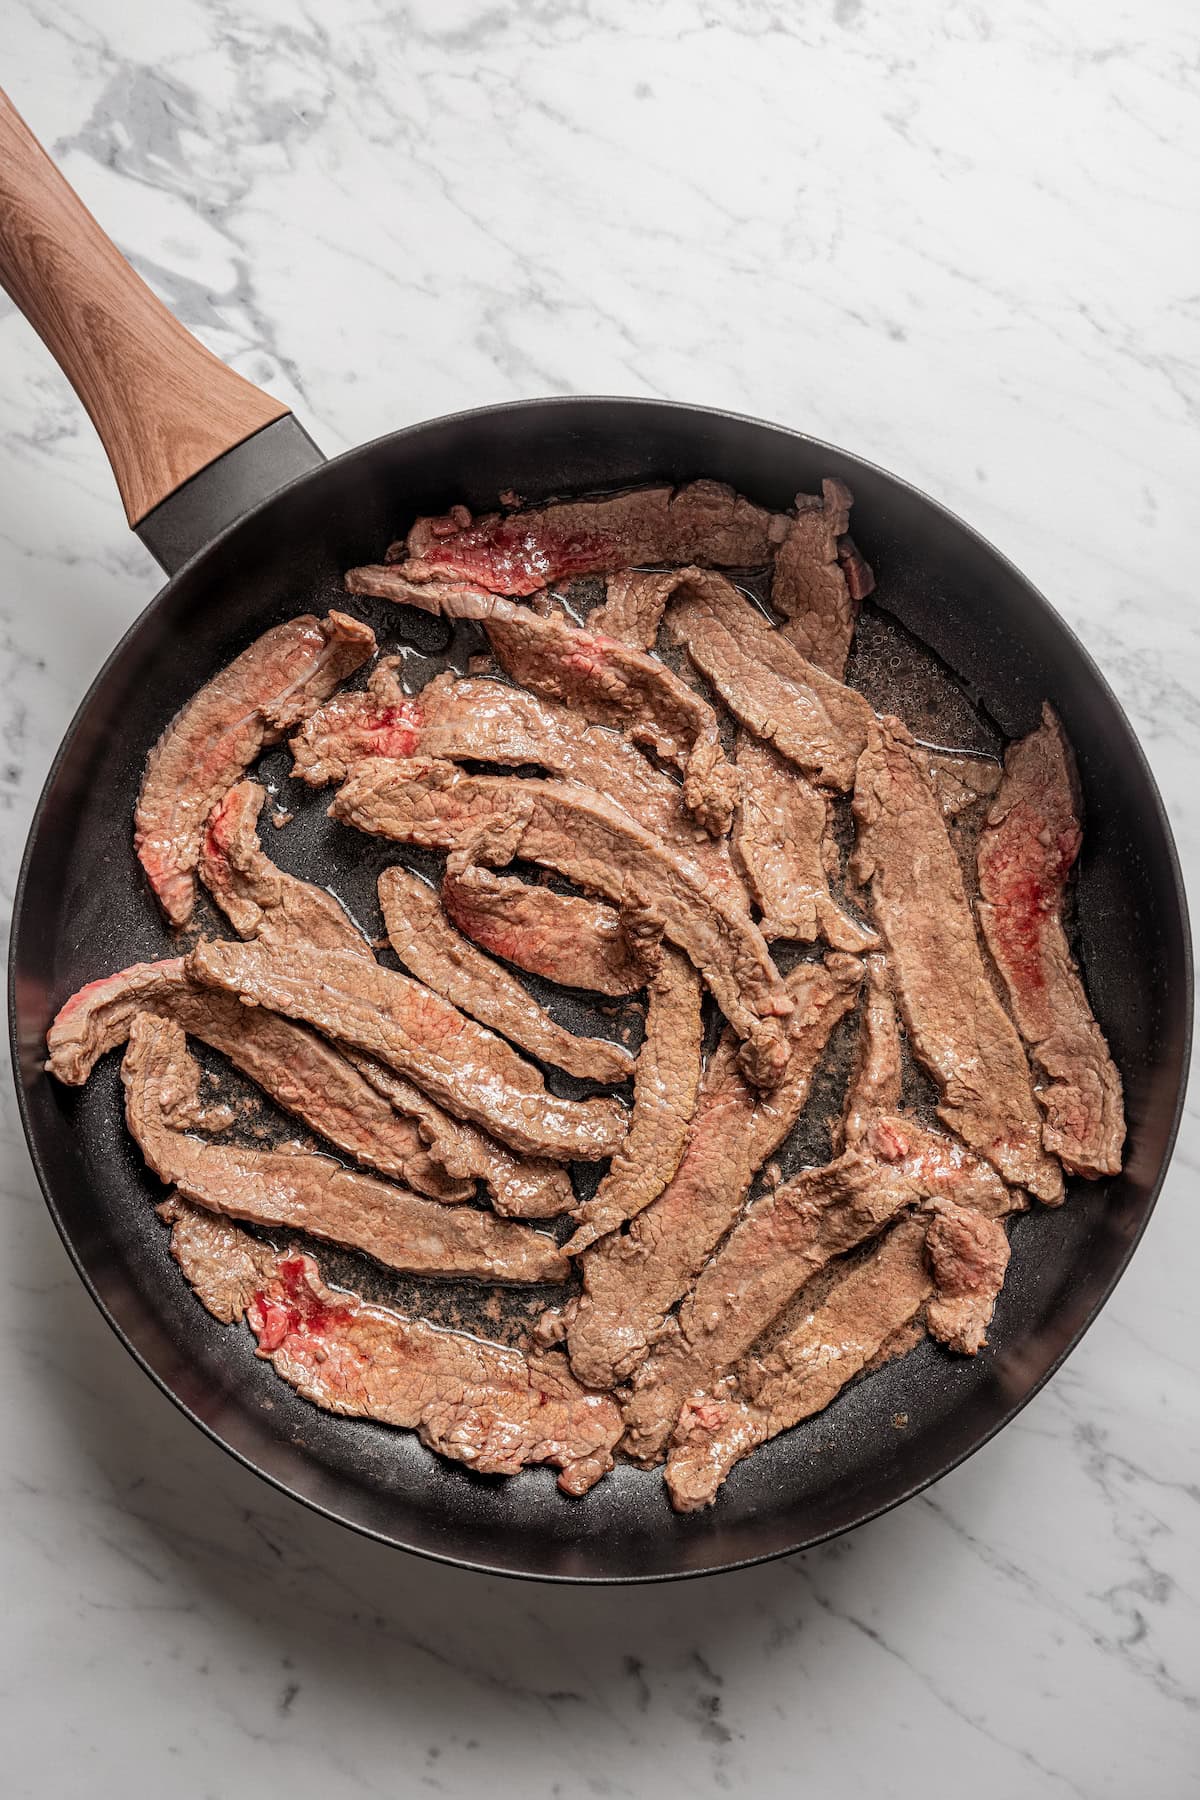 Browned beef strips in a skillet.